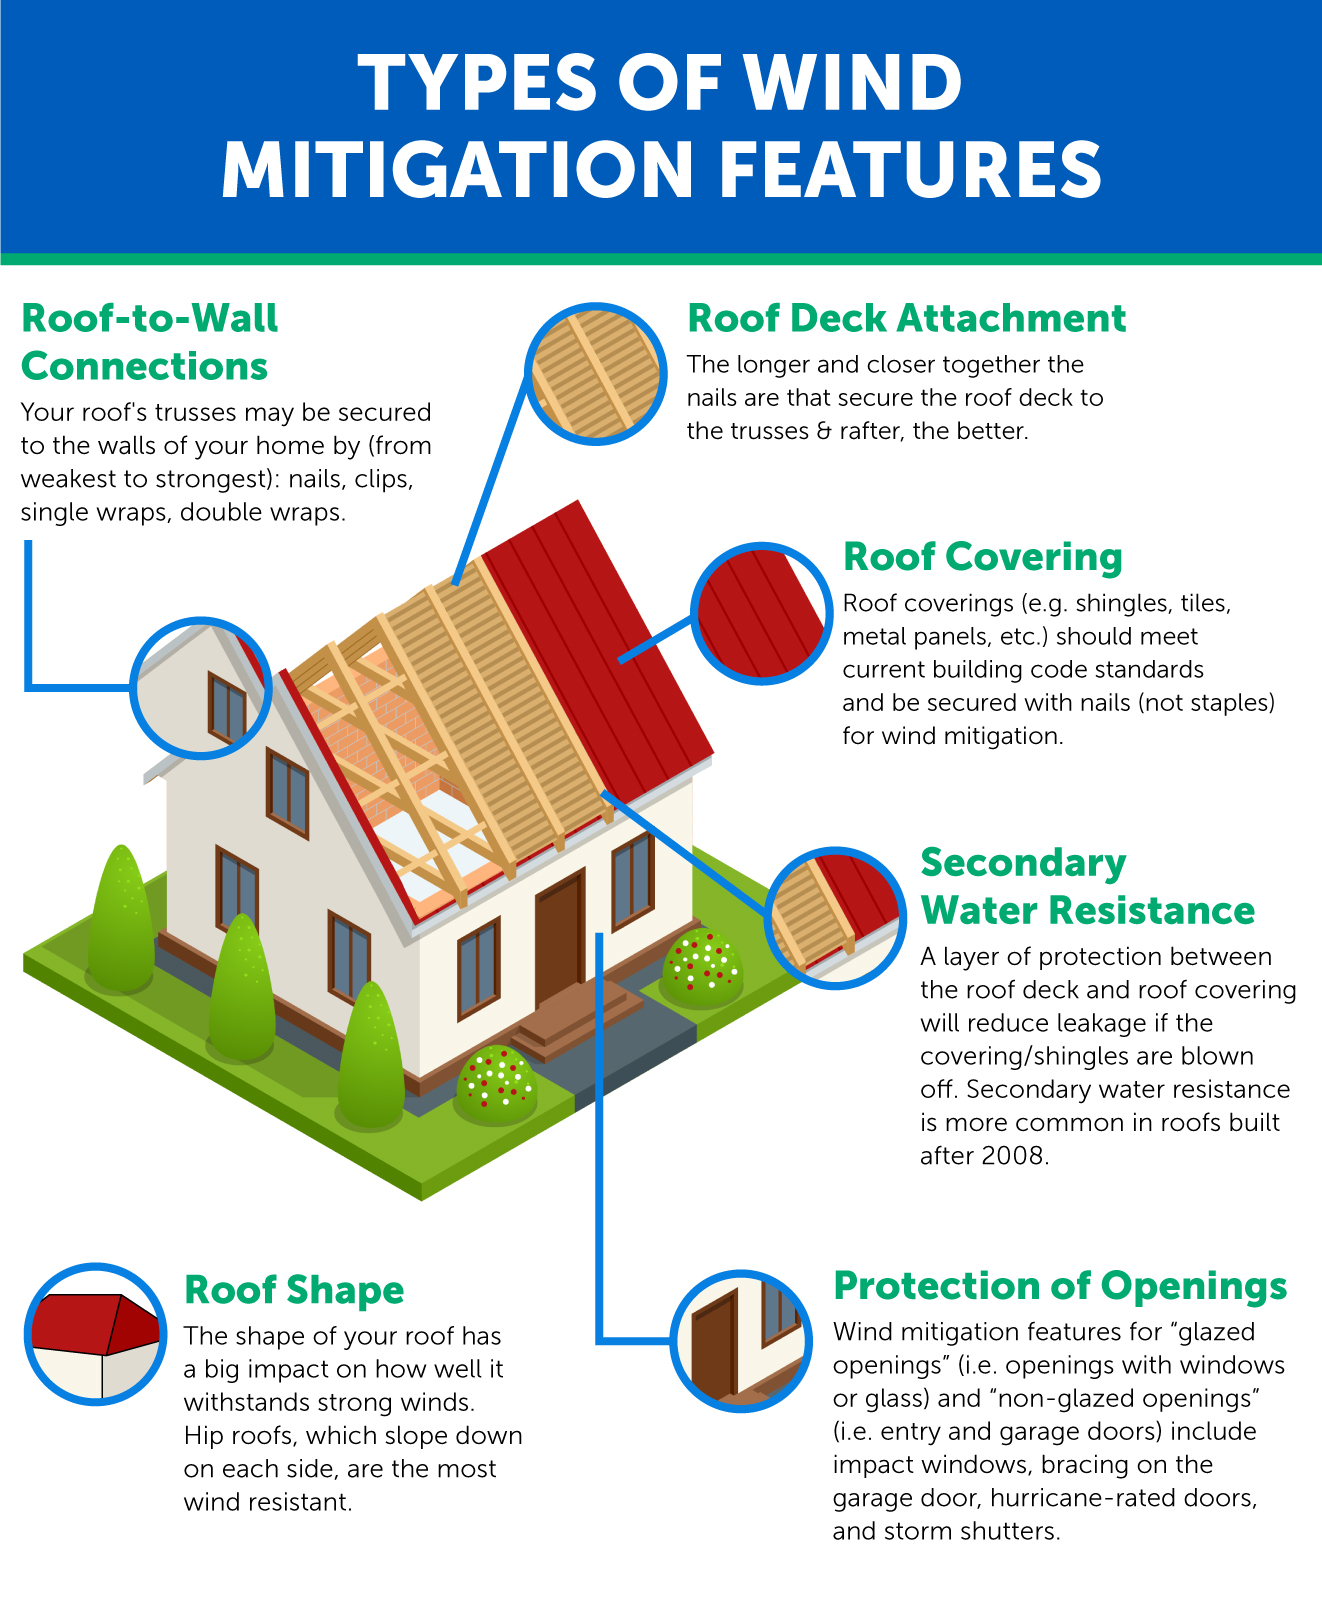 What Are Wind Mitigation Features? (Infographic) - People's Trust